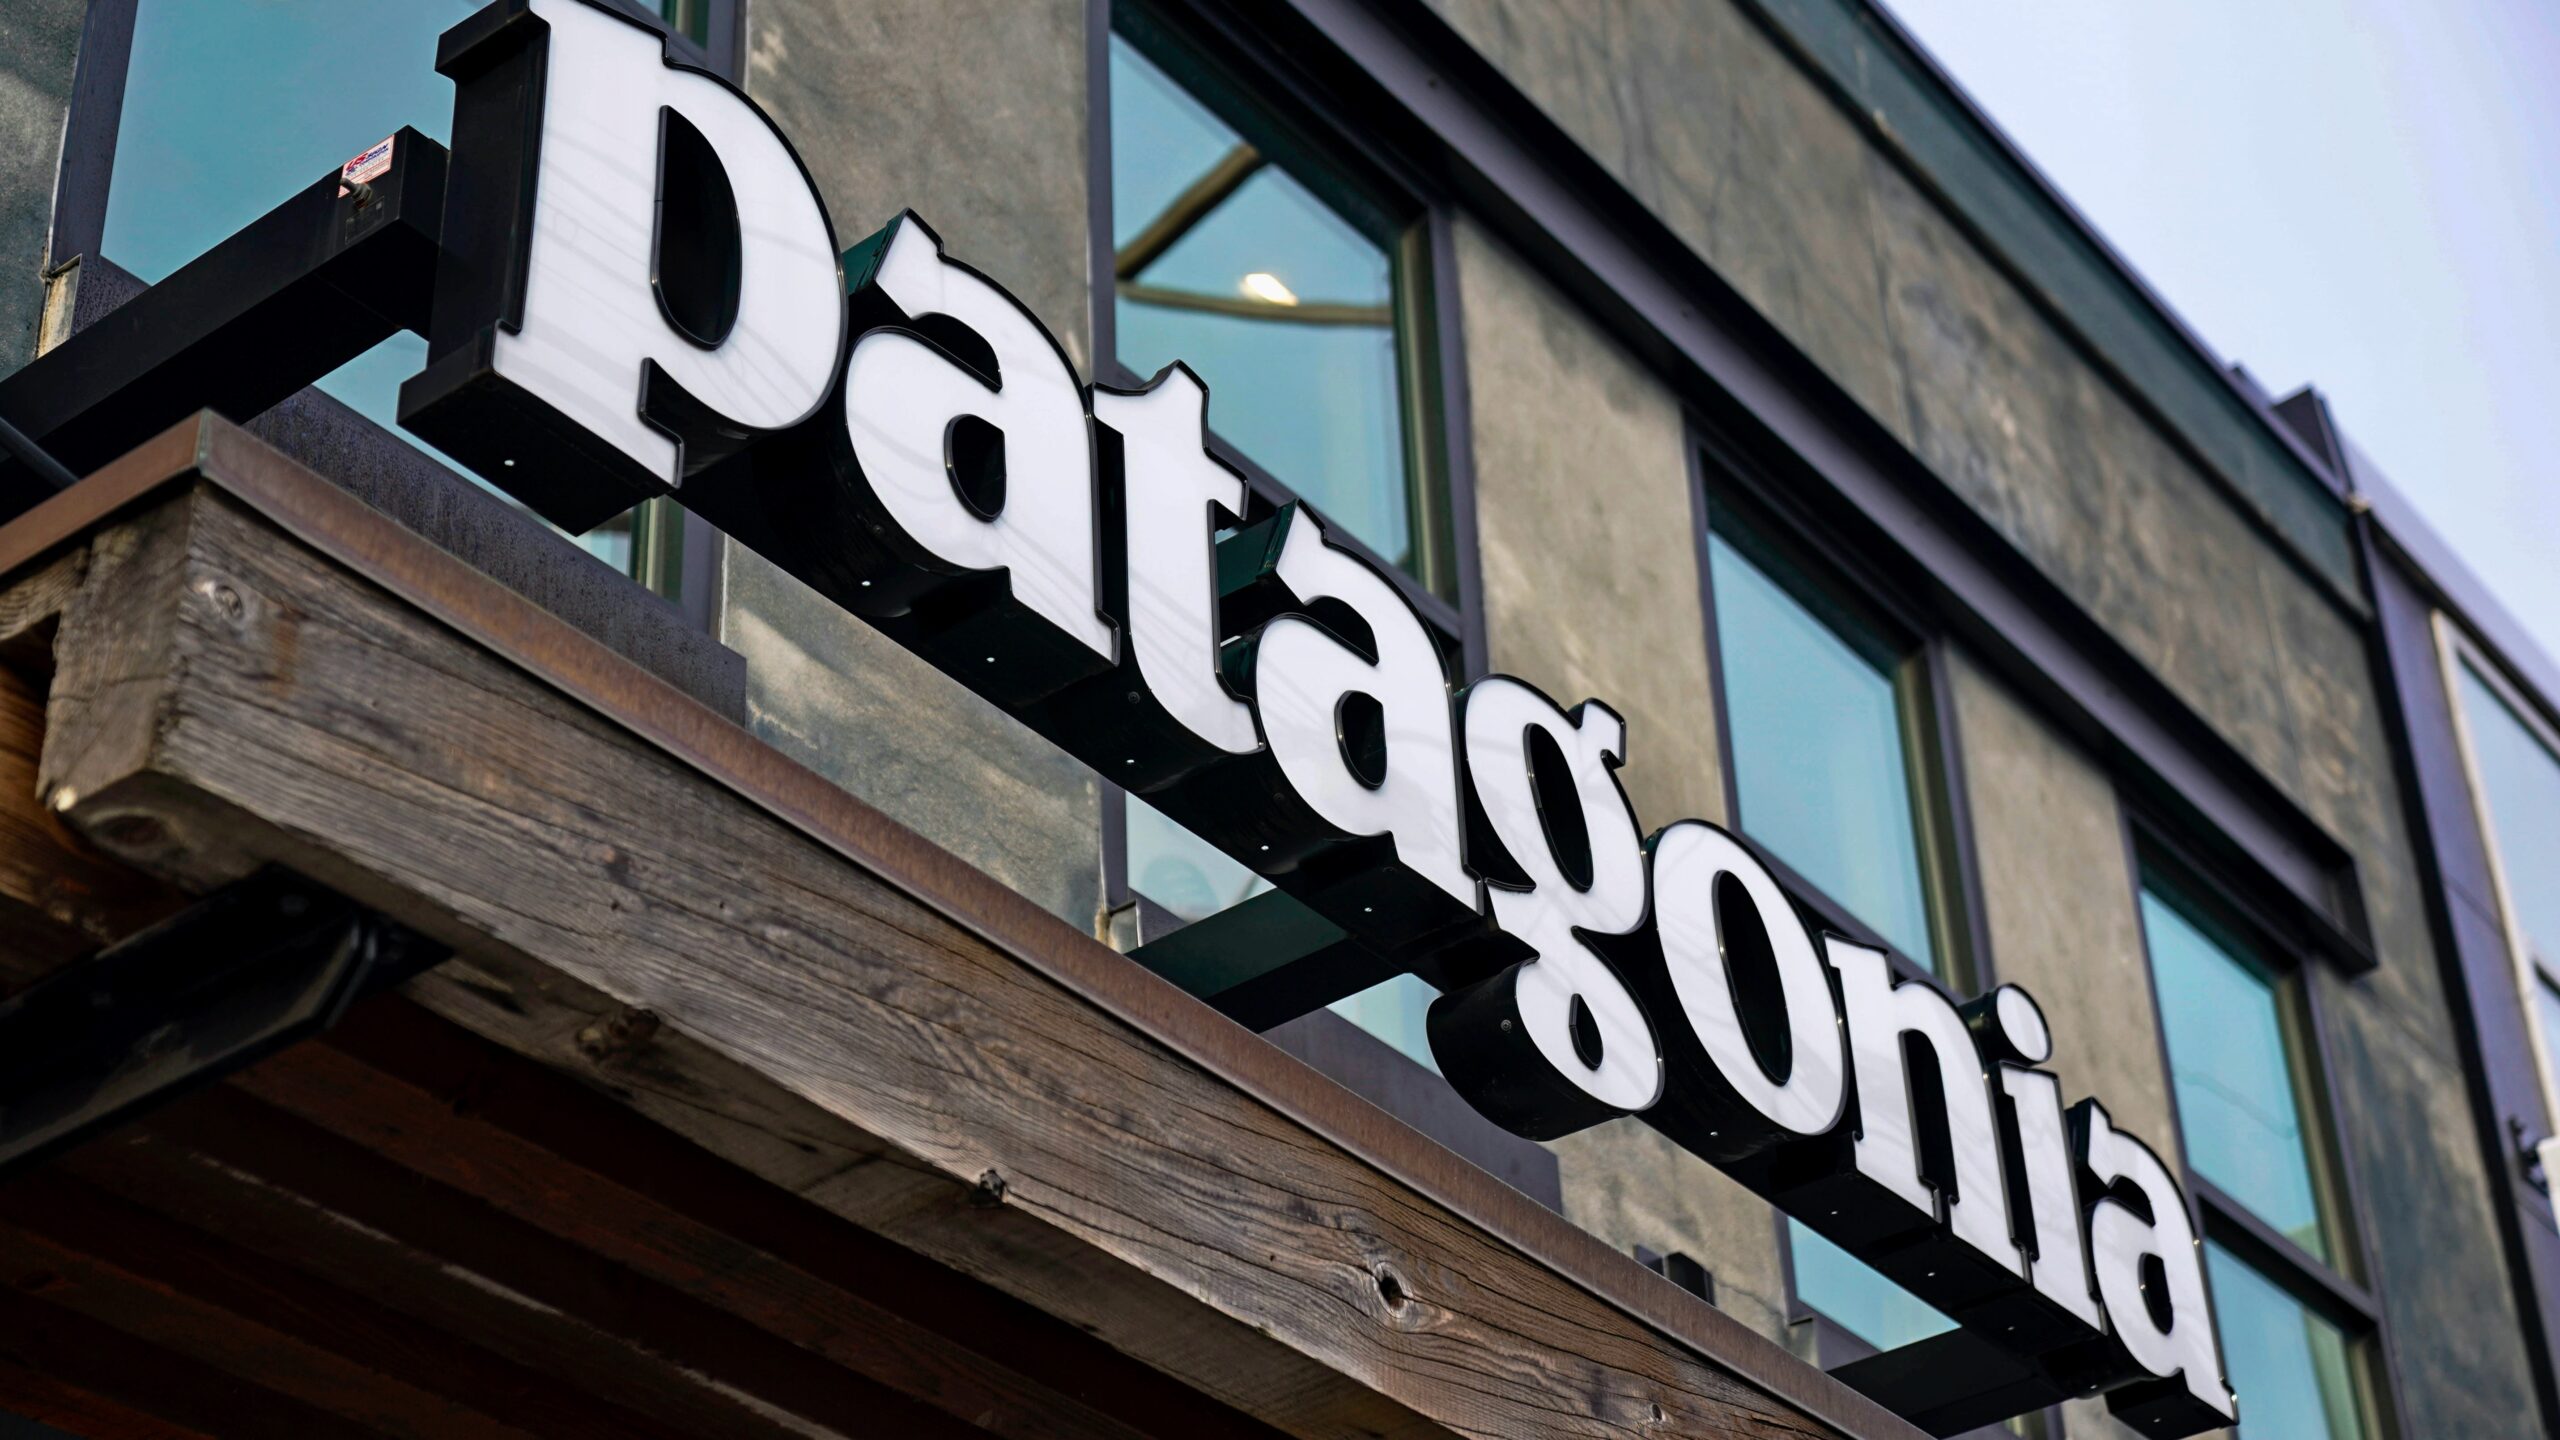 Patagonia made Earth its sole shareholder. Will other companies